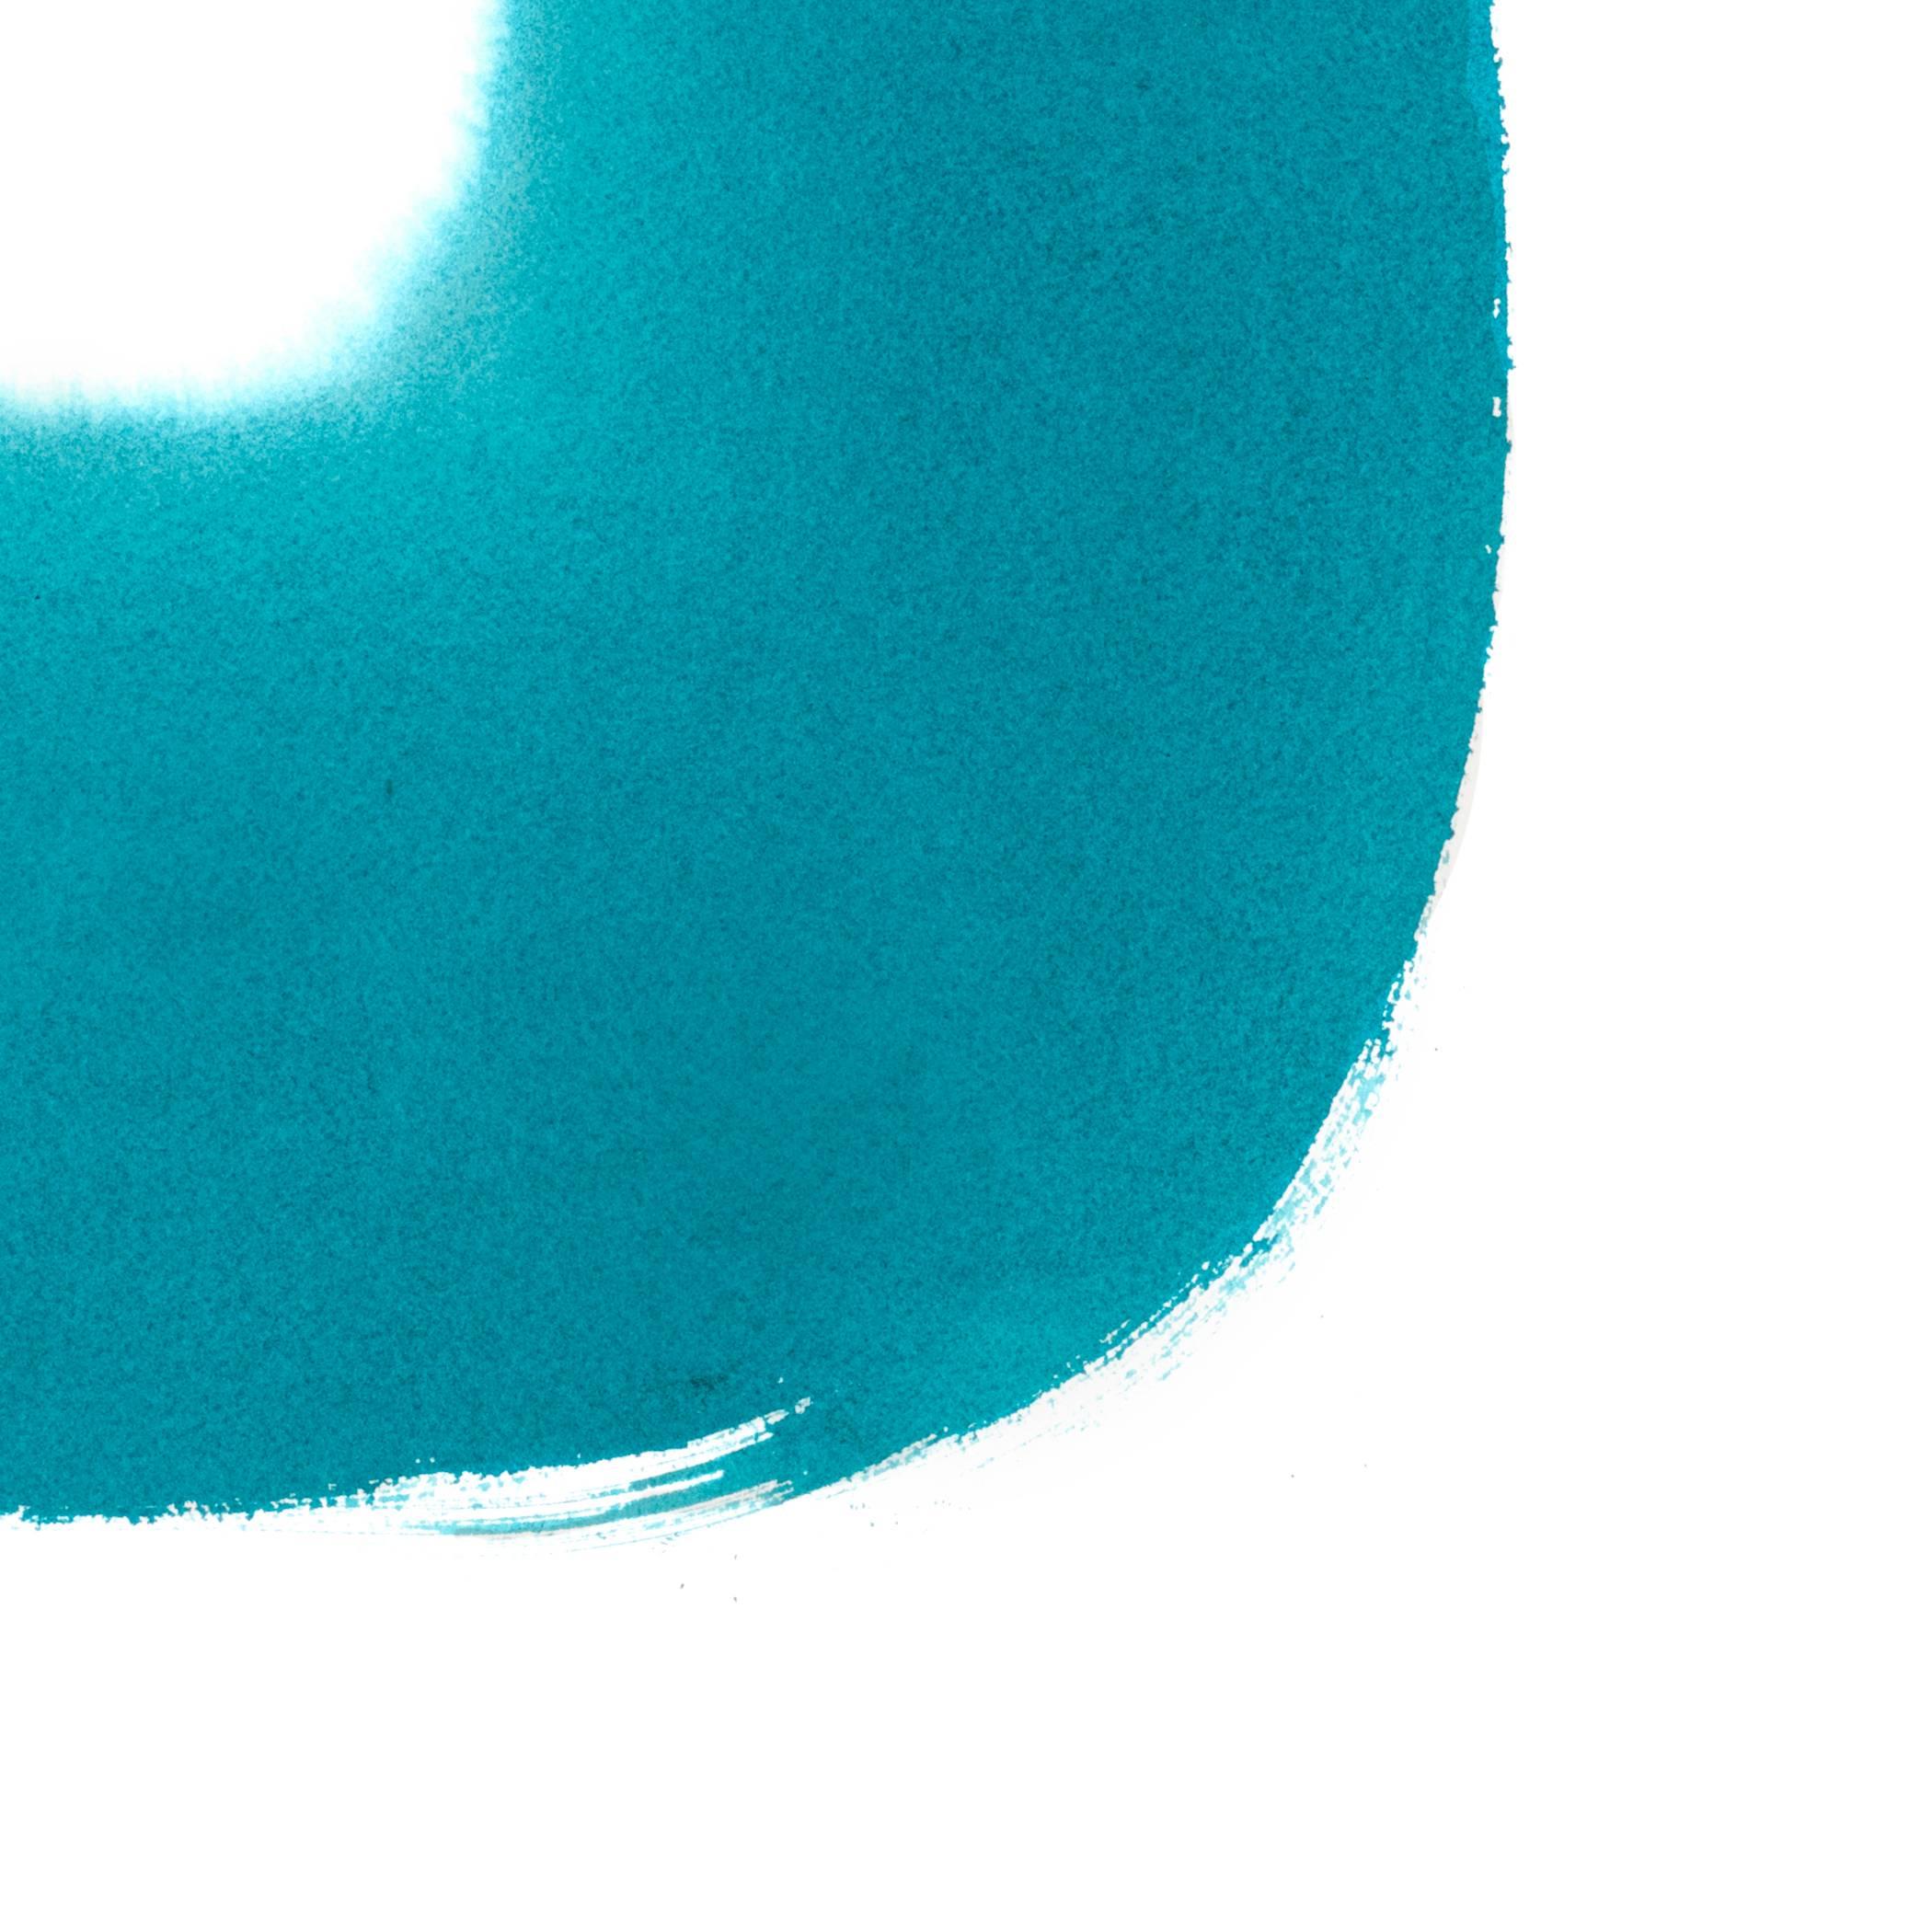 Aperture in Turquoise XXVII_Print Edition 12 of 20 1